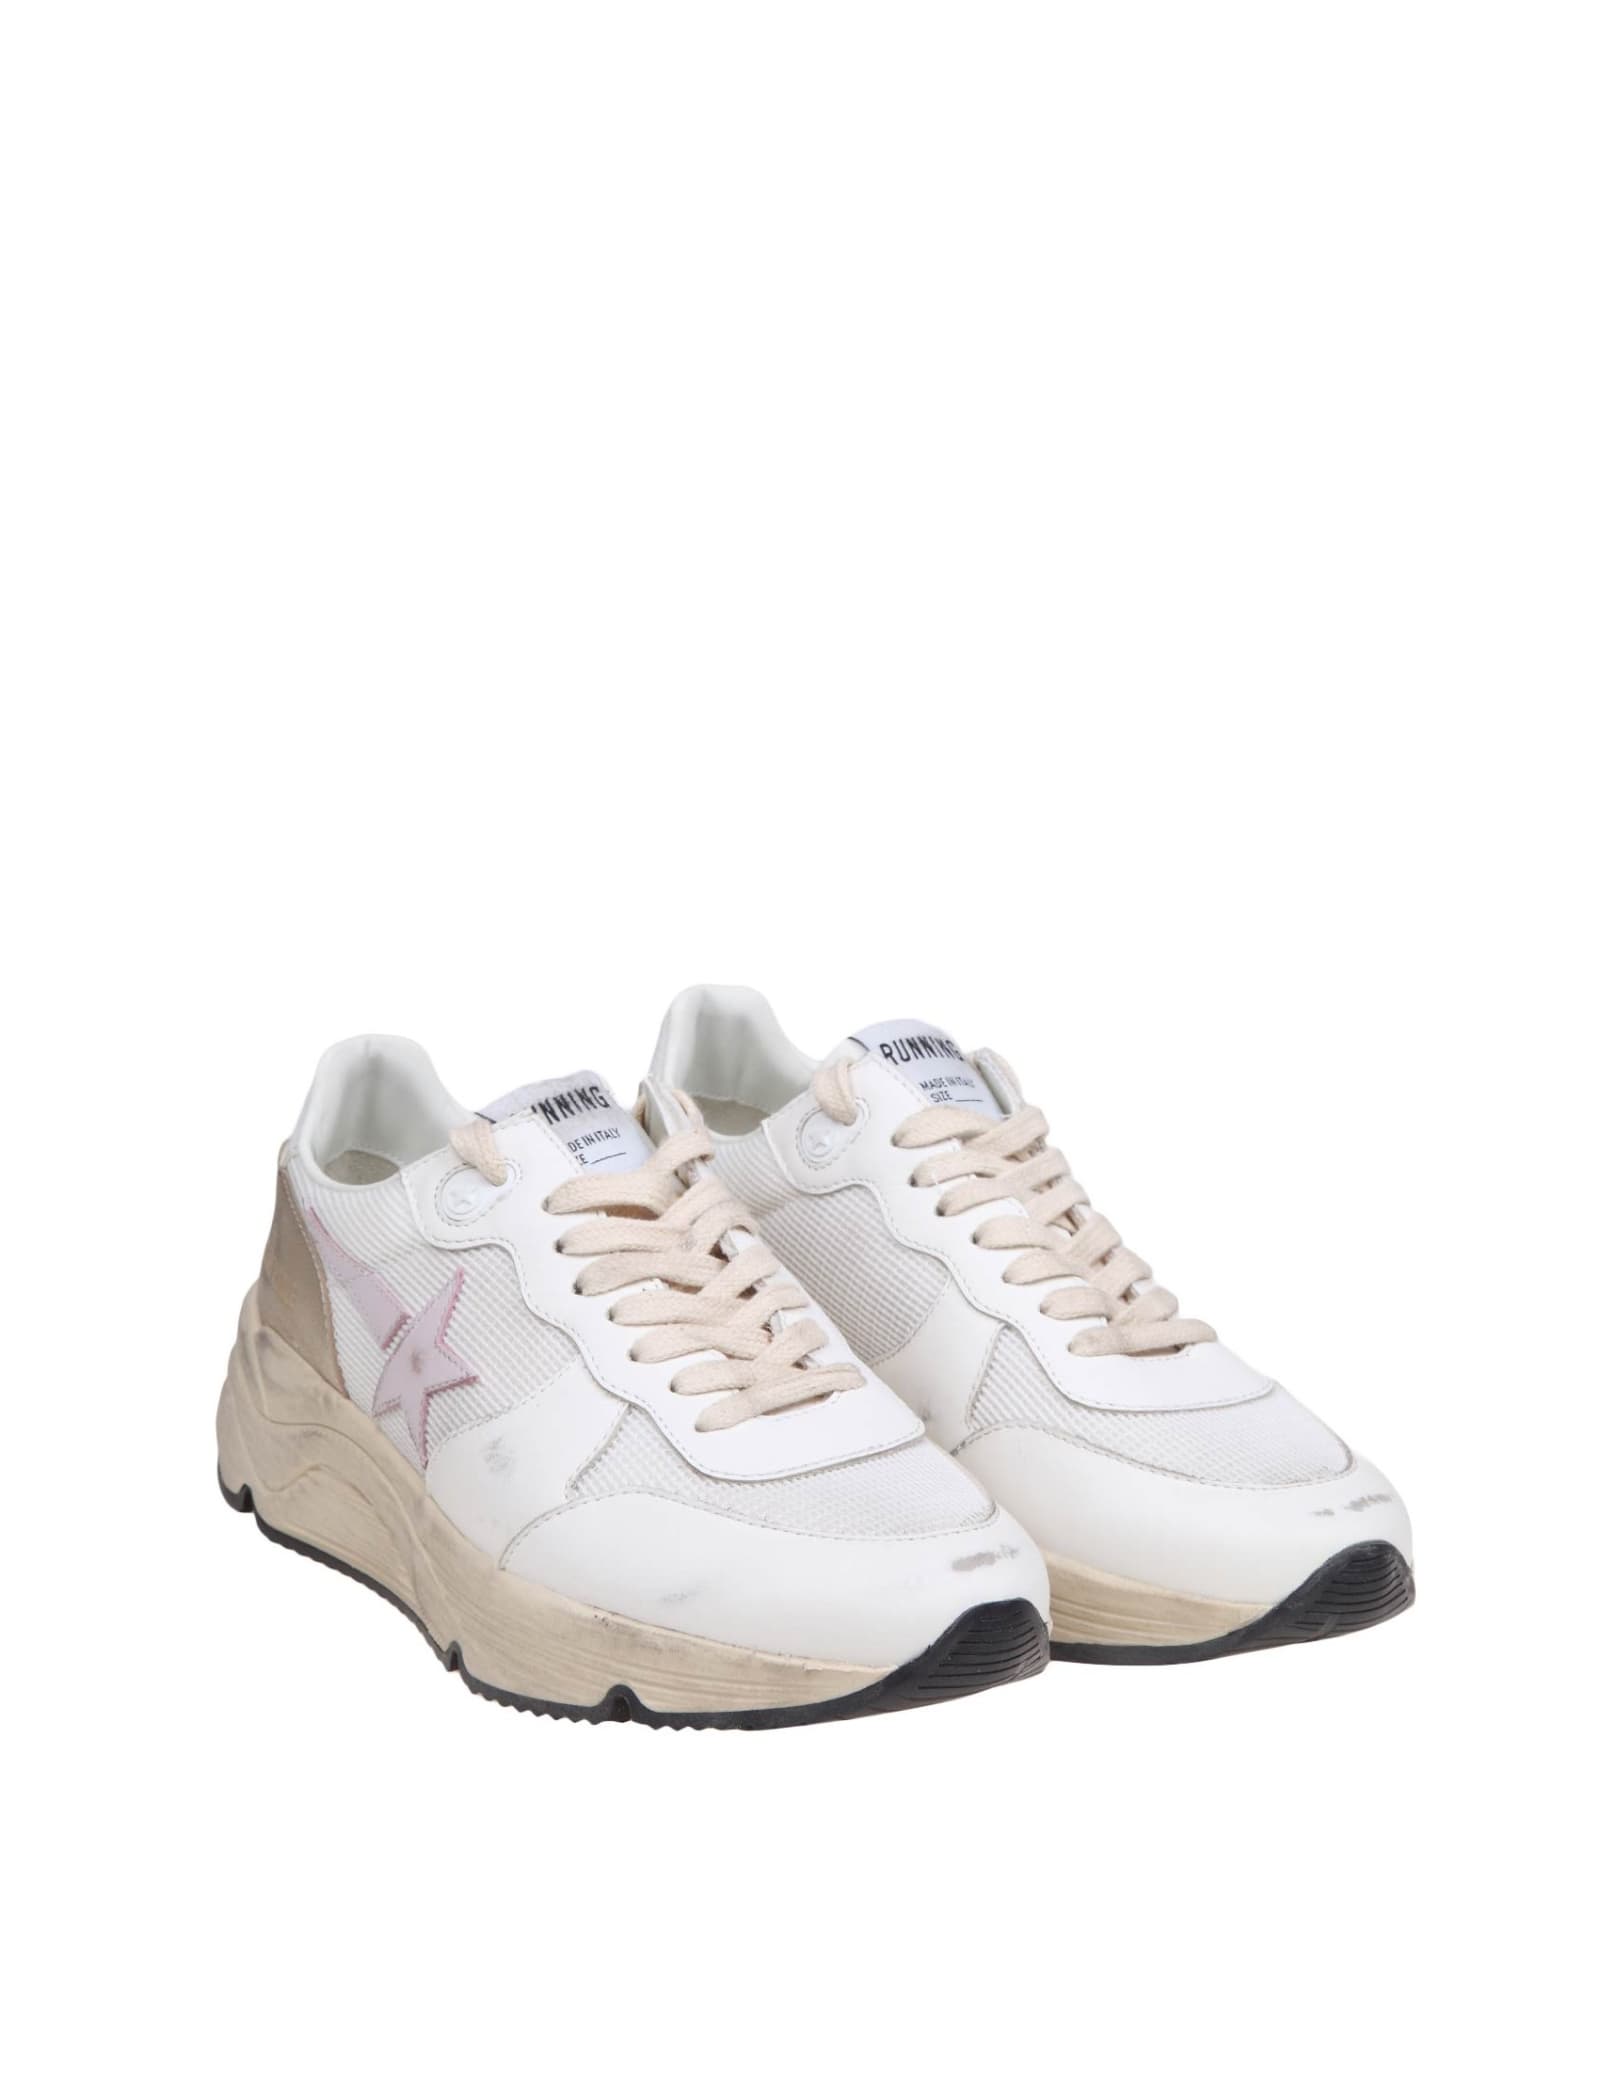 Shop Golden Goose Running Sun Sneakers In Suede And Mesh Color White/gold